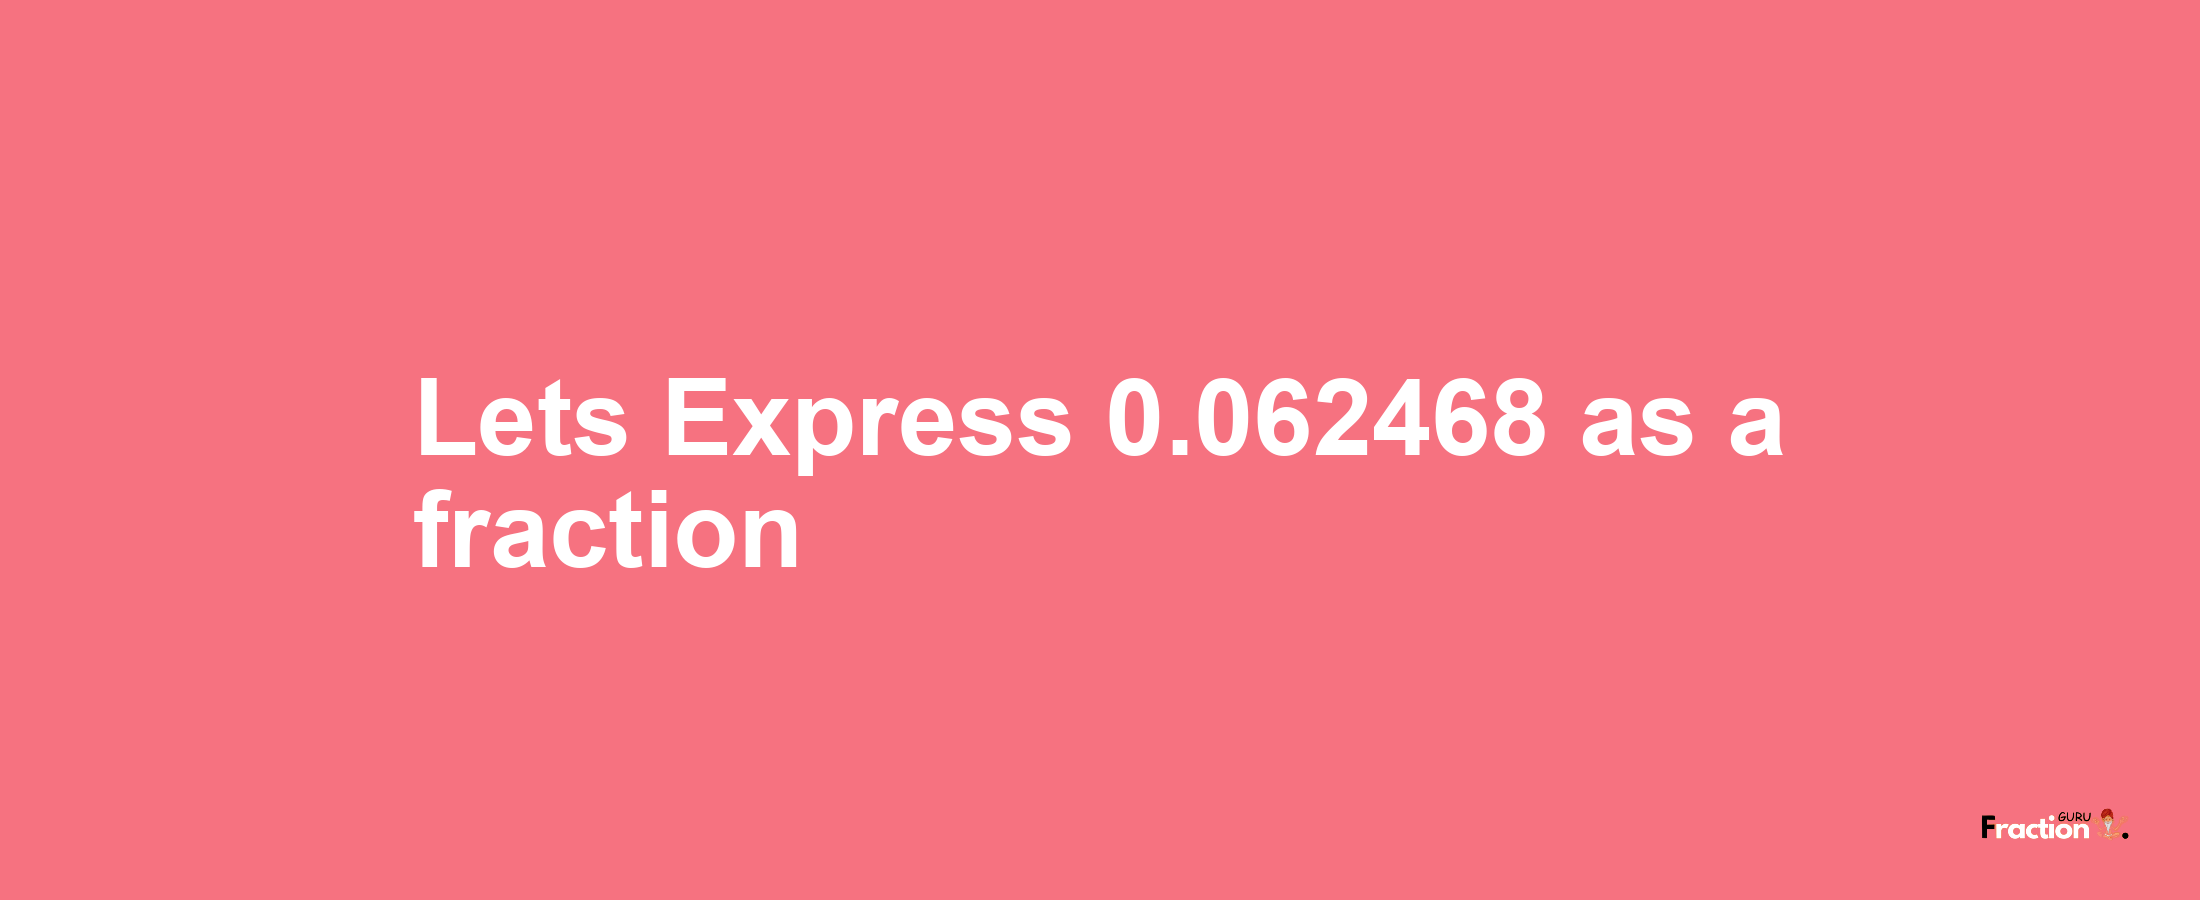 Lets Express 0.062468 as afraction